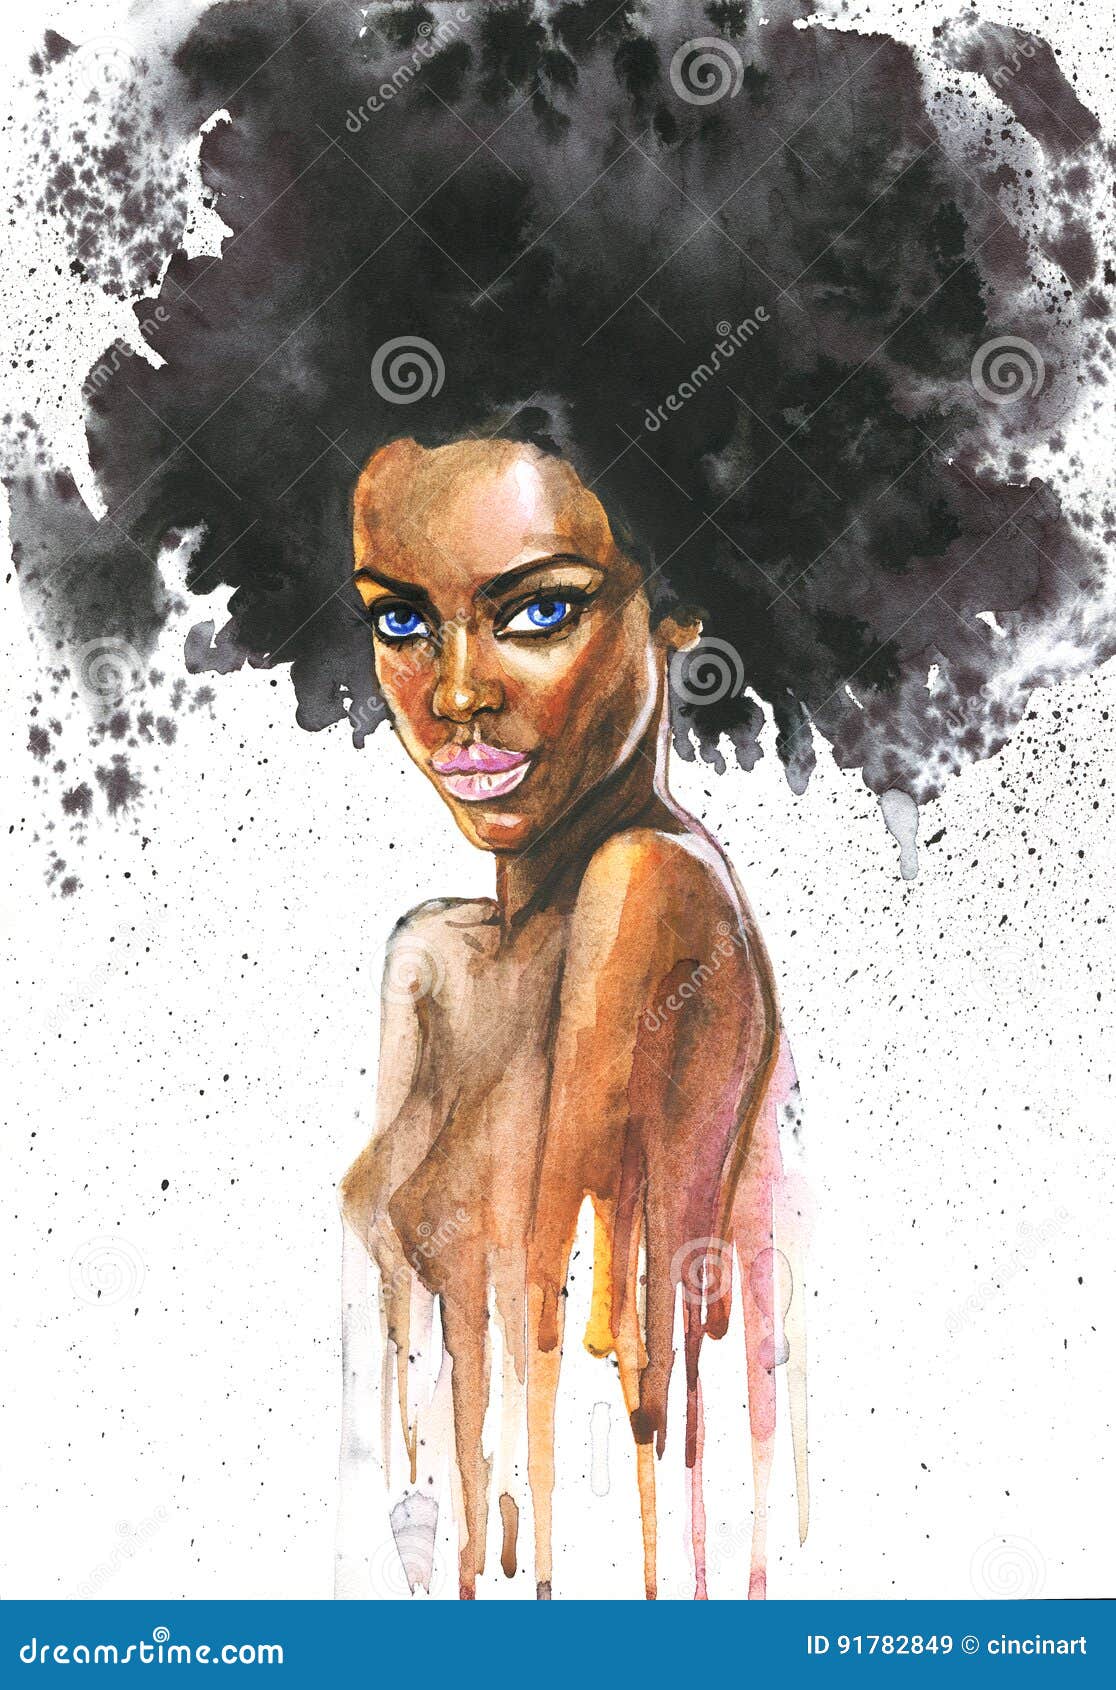 Hand Drawn Beauty African Woman With Splashes Watercolor Abstract